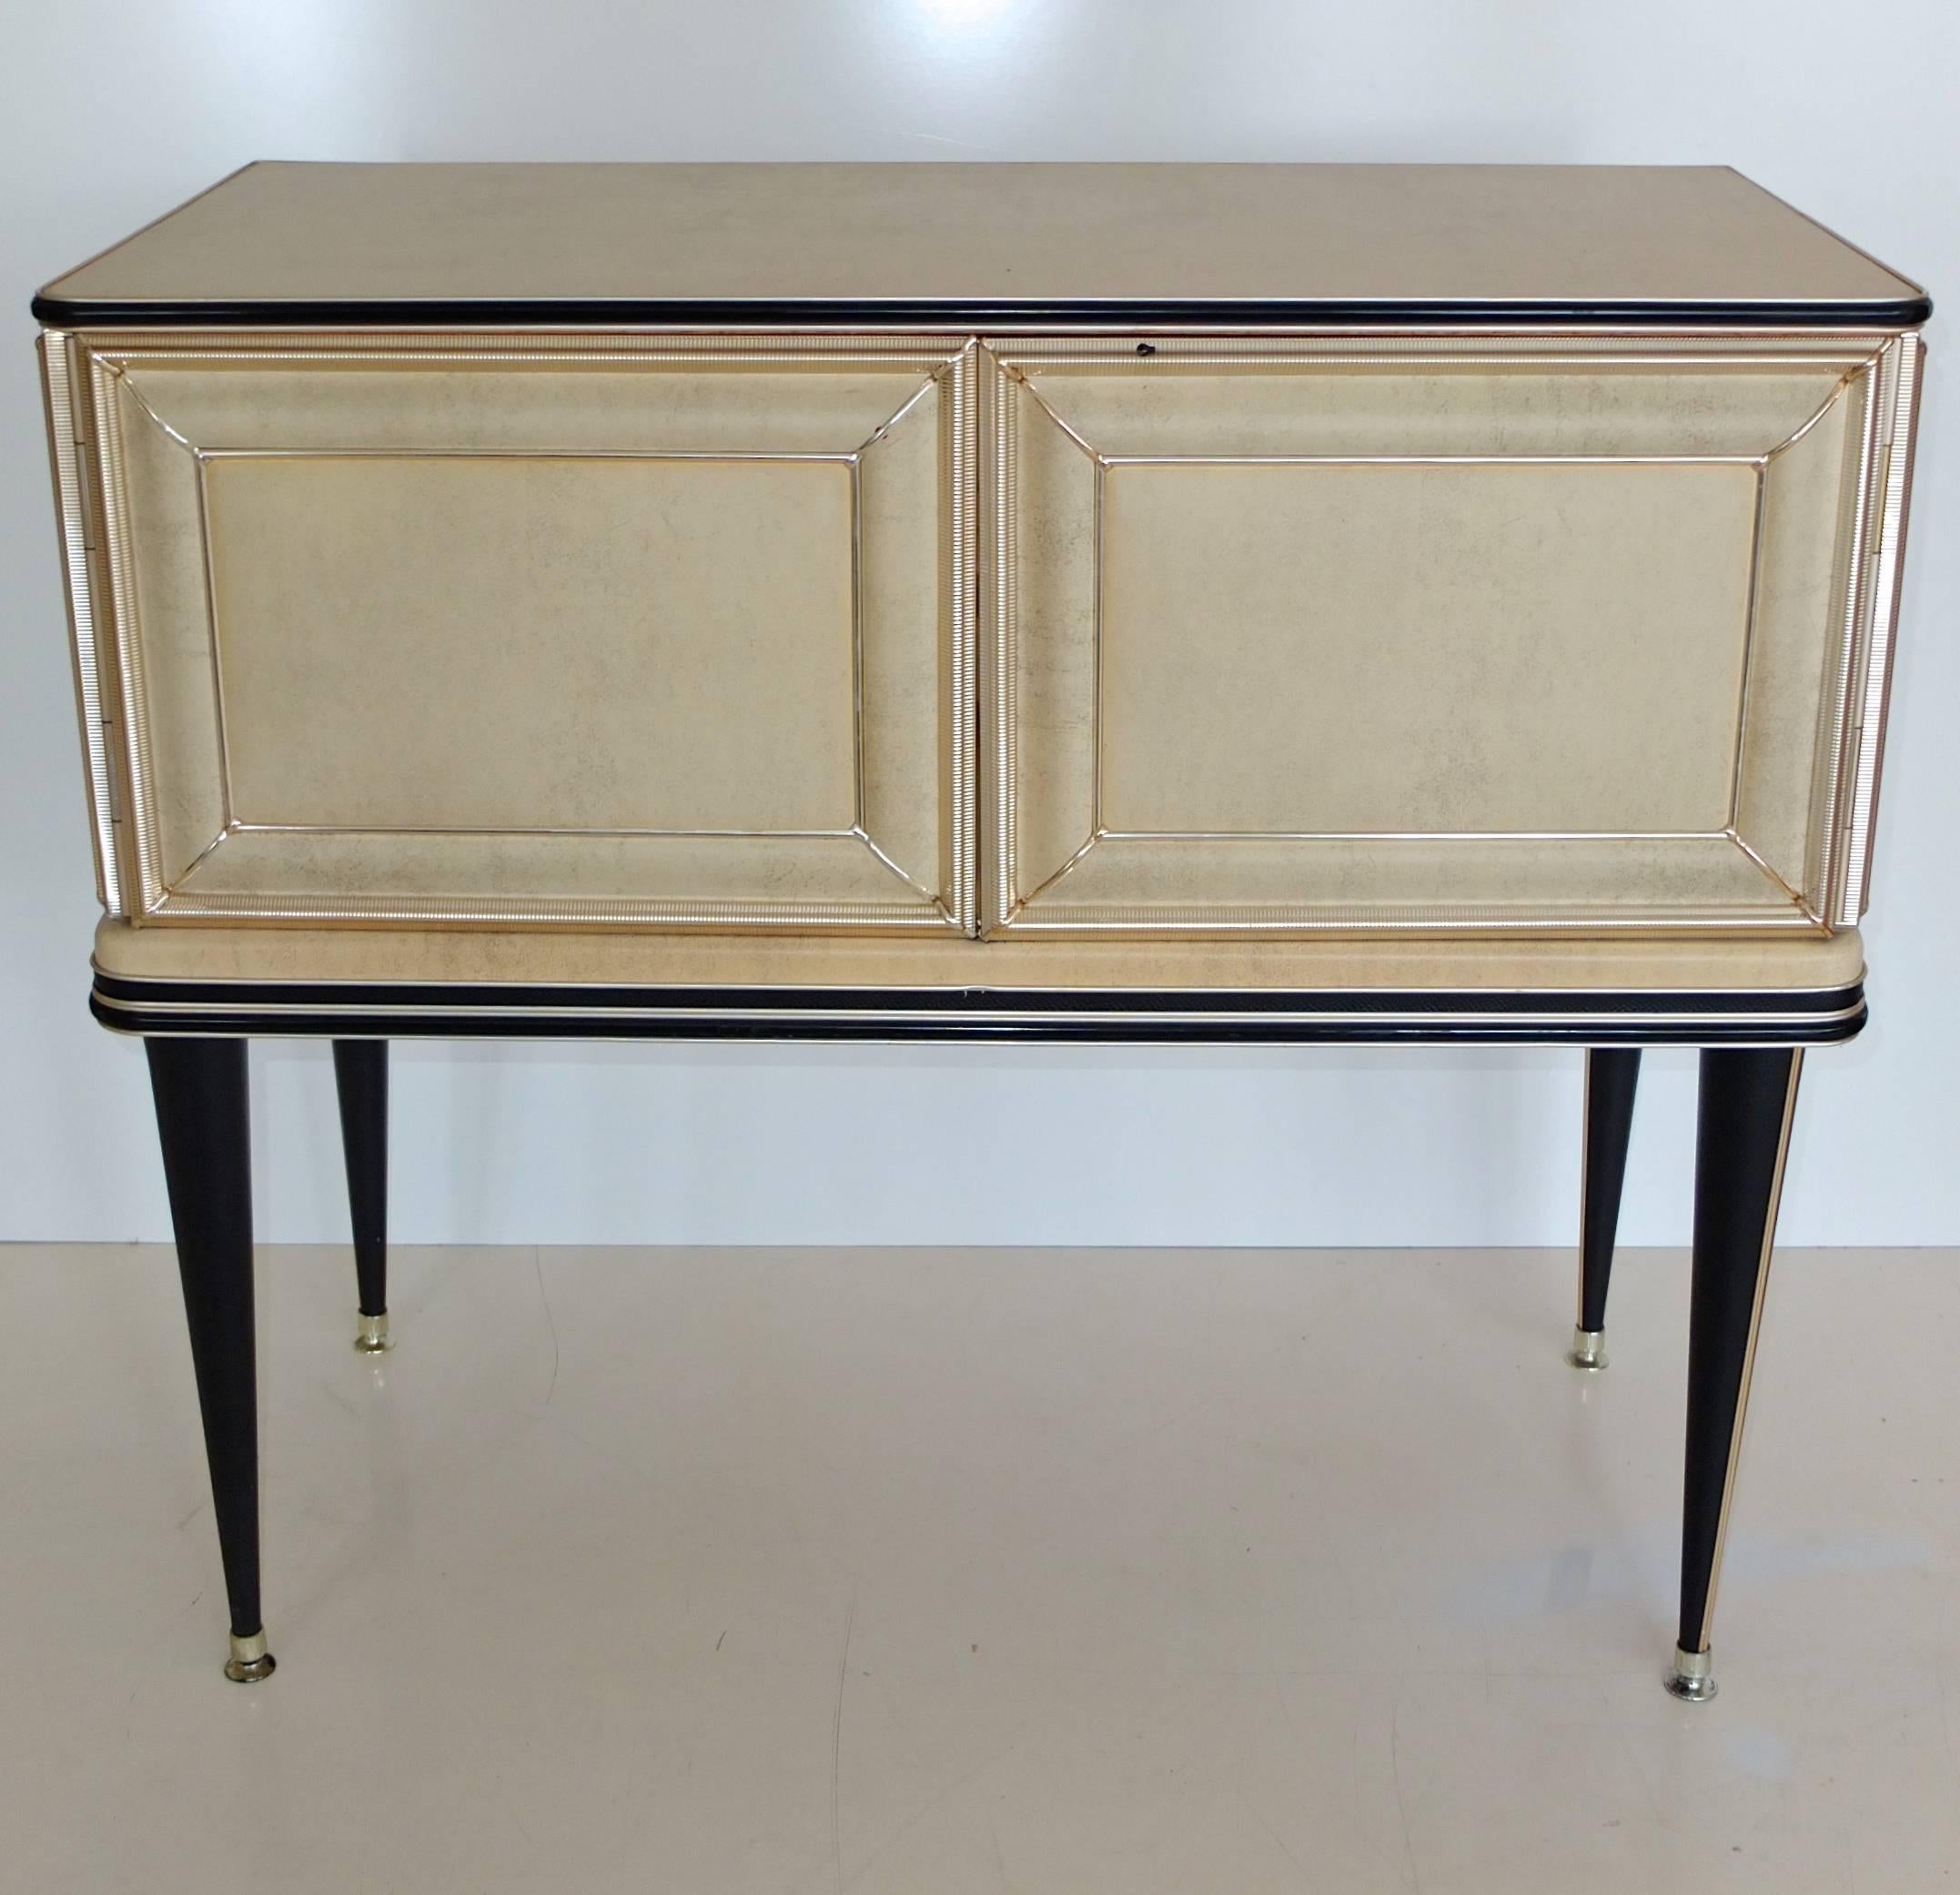 Early 1950s sideboard bar cabinet created by Umberto Mascagni of Bologna, Italy, imported to the UK by I. Barget and retailed through Harrod's, London, 1952-1955. Mascagni was known for his provocative use of new materials in furniture designs such